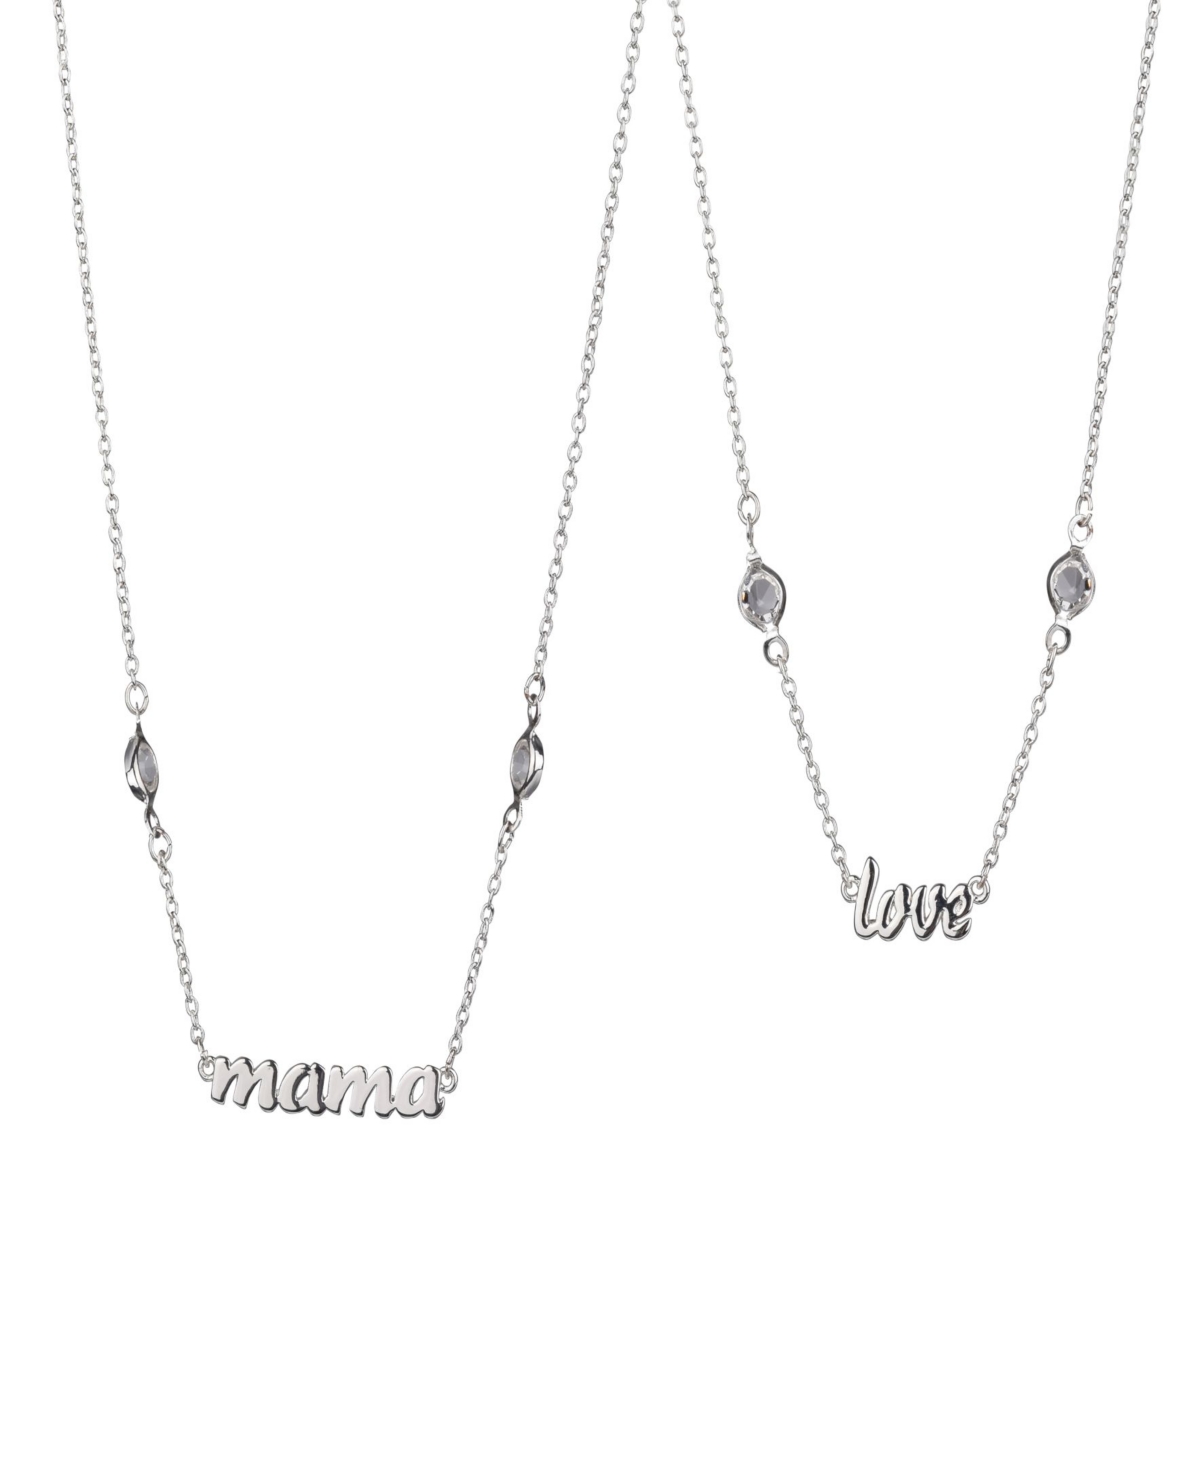 Fine Silver Plated Love and Mama Necklace Set, 2 Piece - Silver Plated